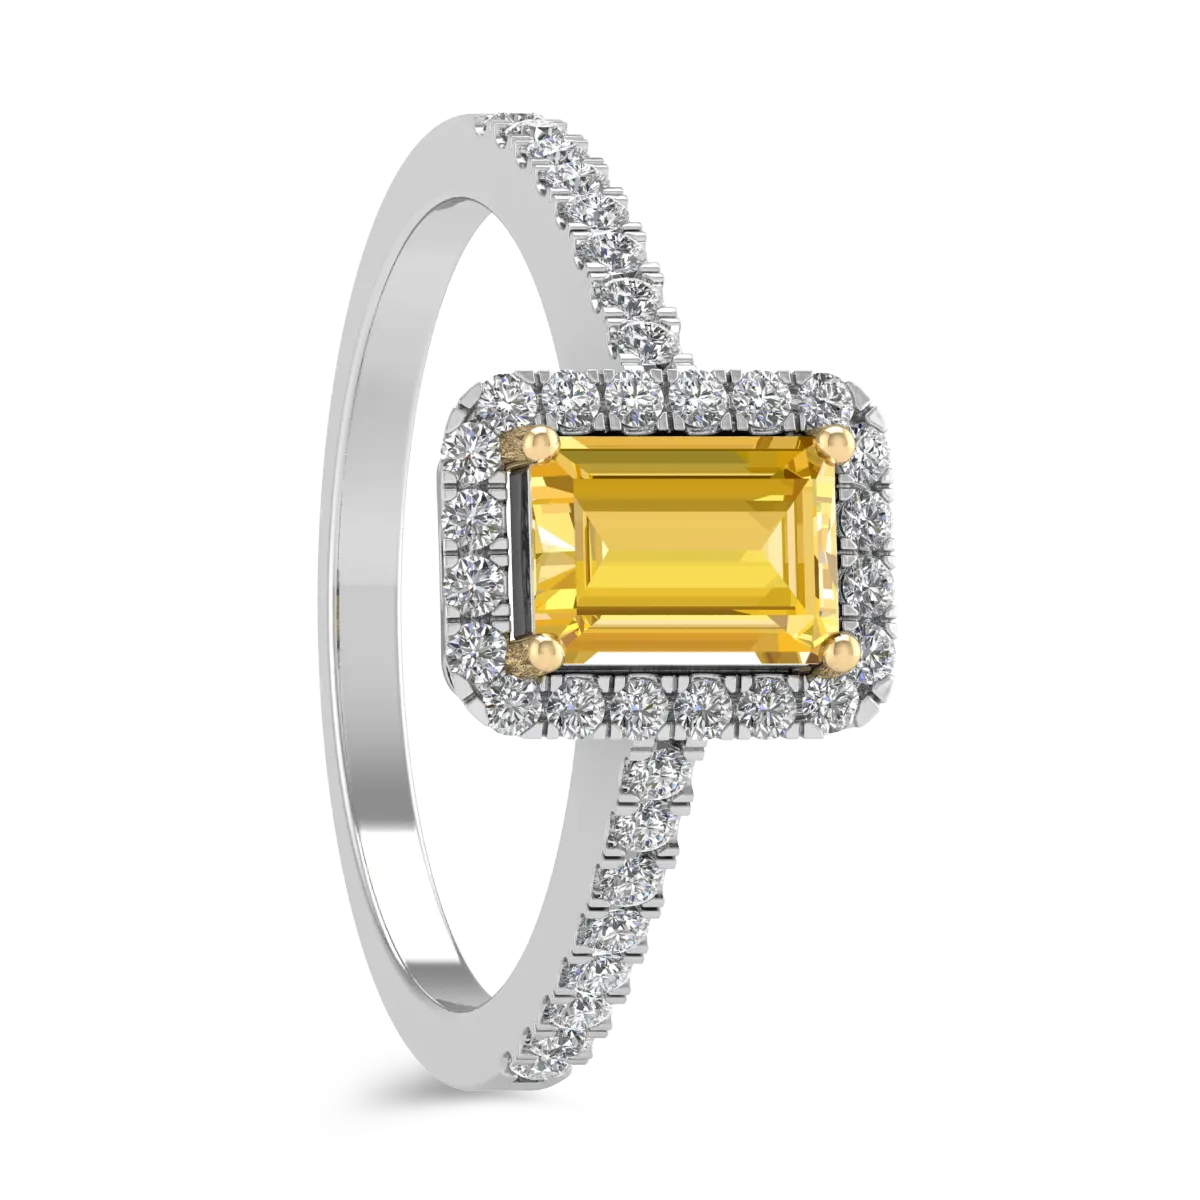 18K white gold engagement ring with 0.66ct yellow sapphire and 0.28ct diamonds